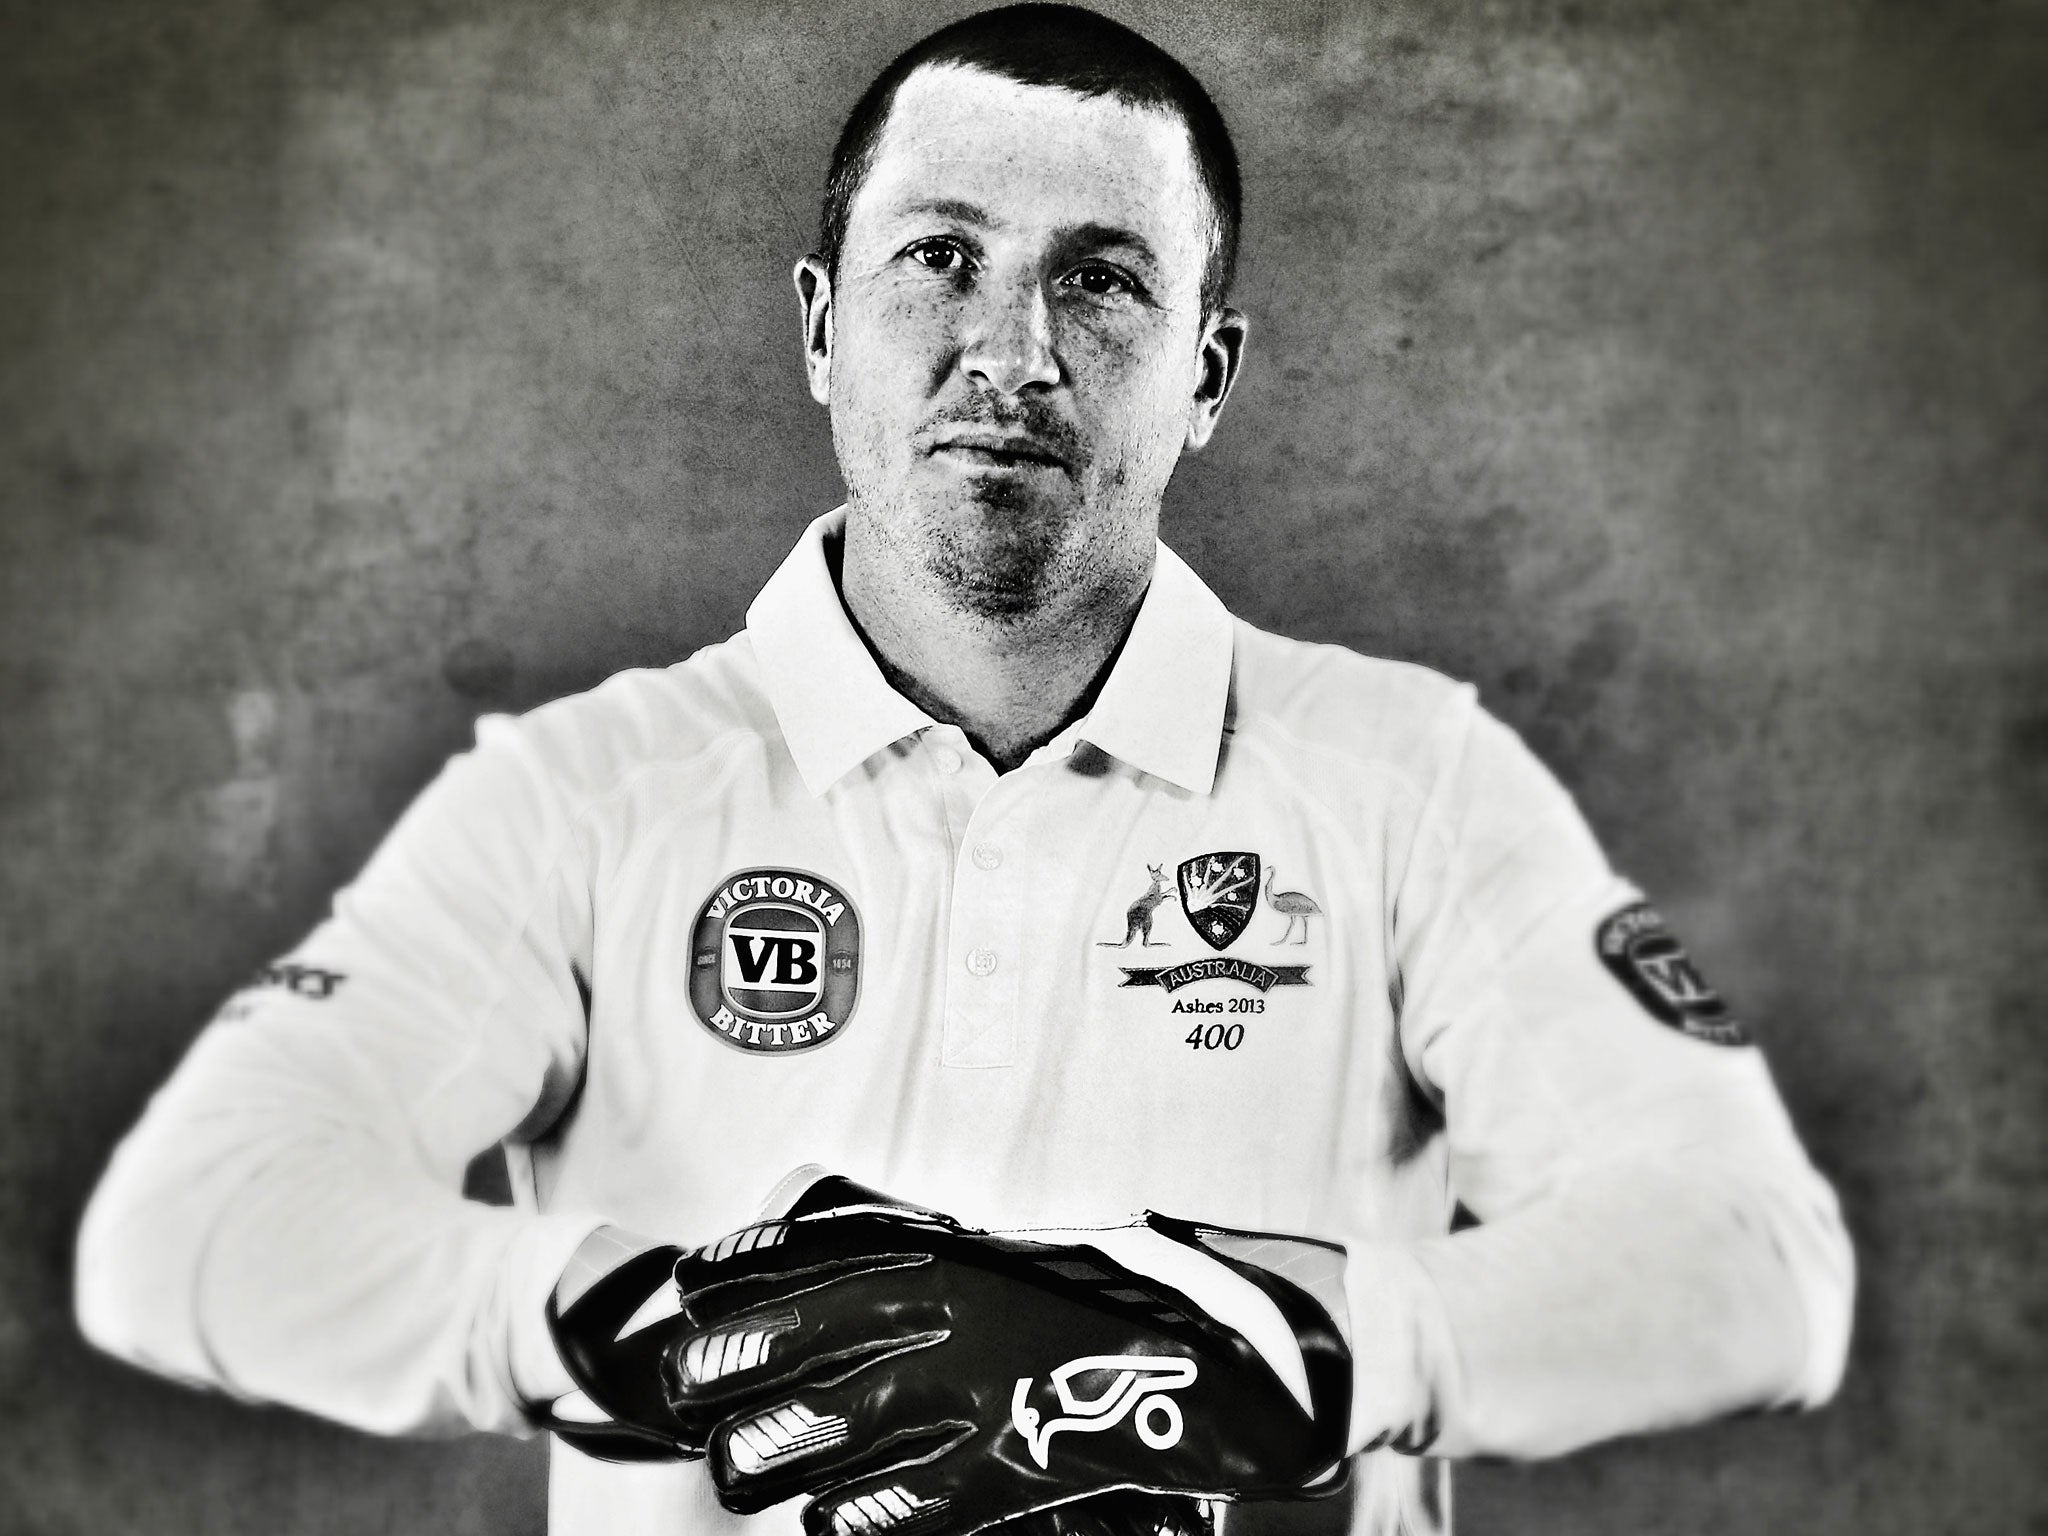 Keeping fit: Haddin shown in an image processed through digital filters